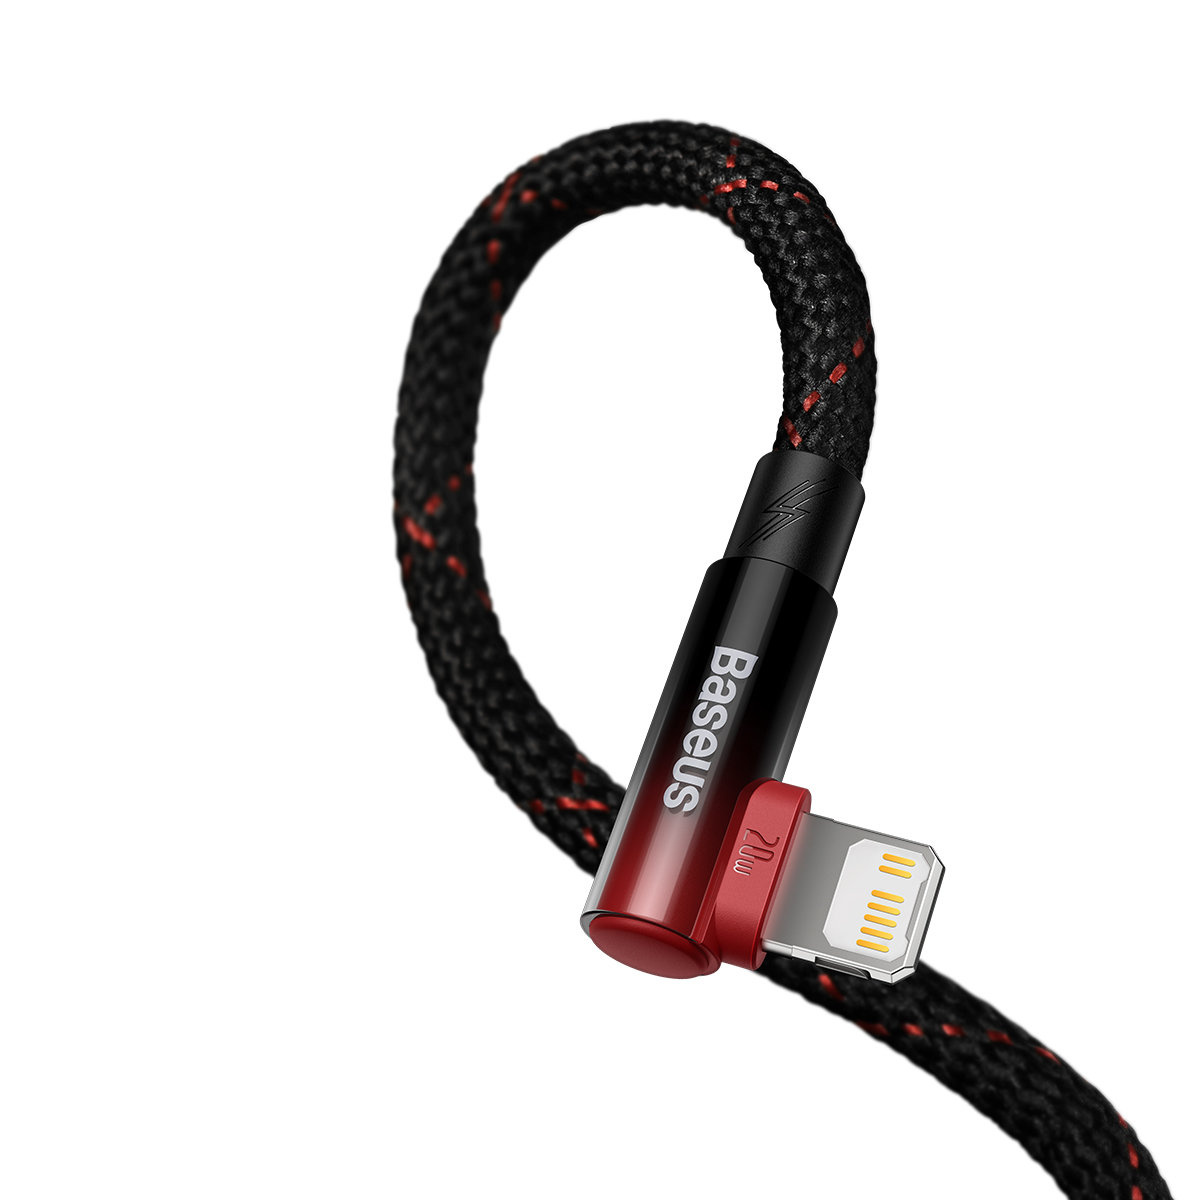 Baseus MVP 2 Elbow Power Delivery USB-C/Lightning 1m 20W red